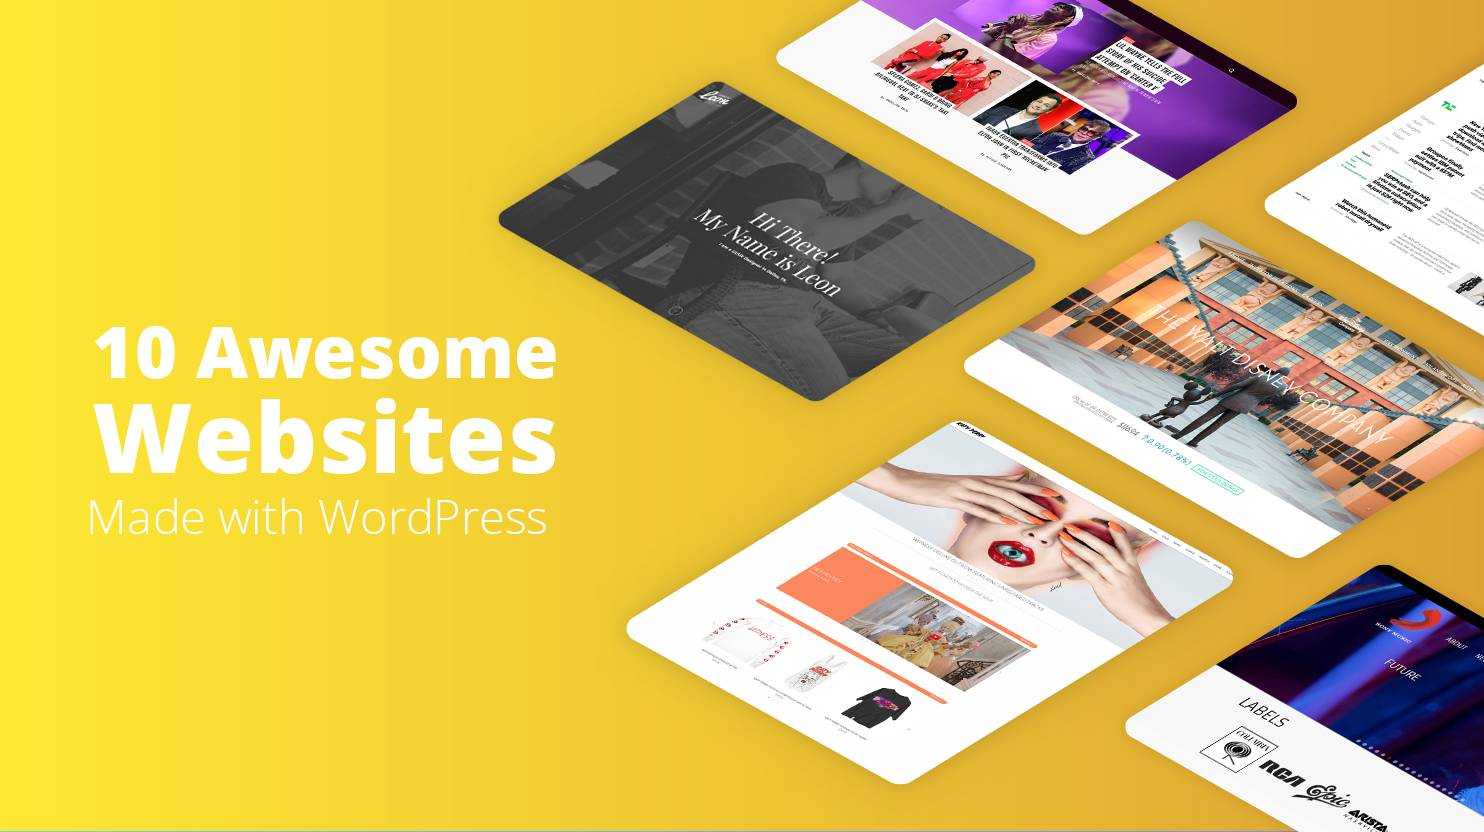 10 Awesome Websites Made with WordPress, Vectribe